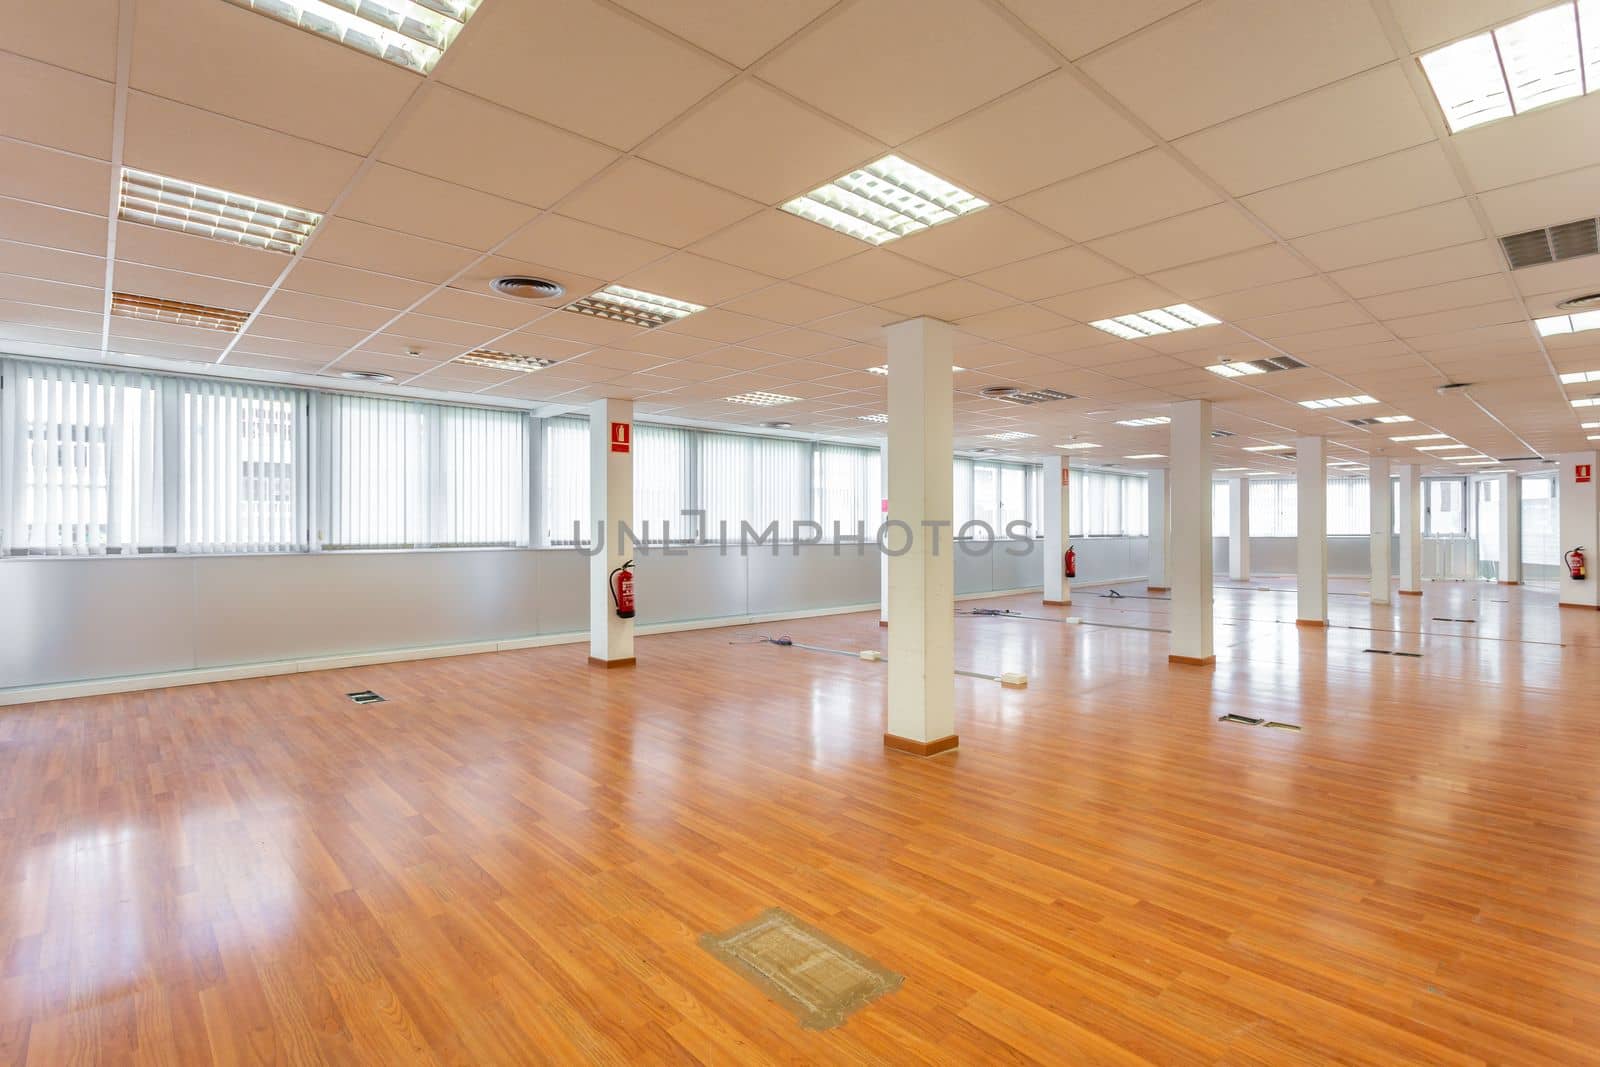 Large empty space with ceiling tiles, fluorescent lights, light brown laminate flooring and white painted columns. Large office space left from a company. by apavlin